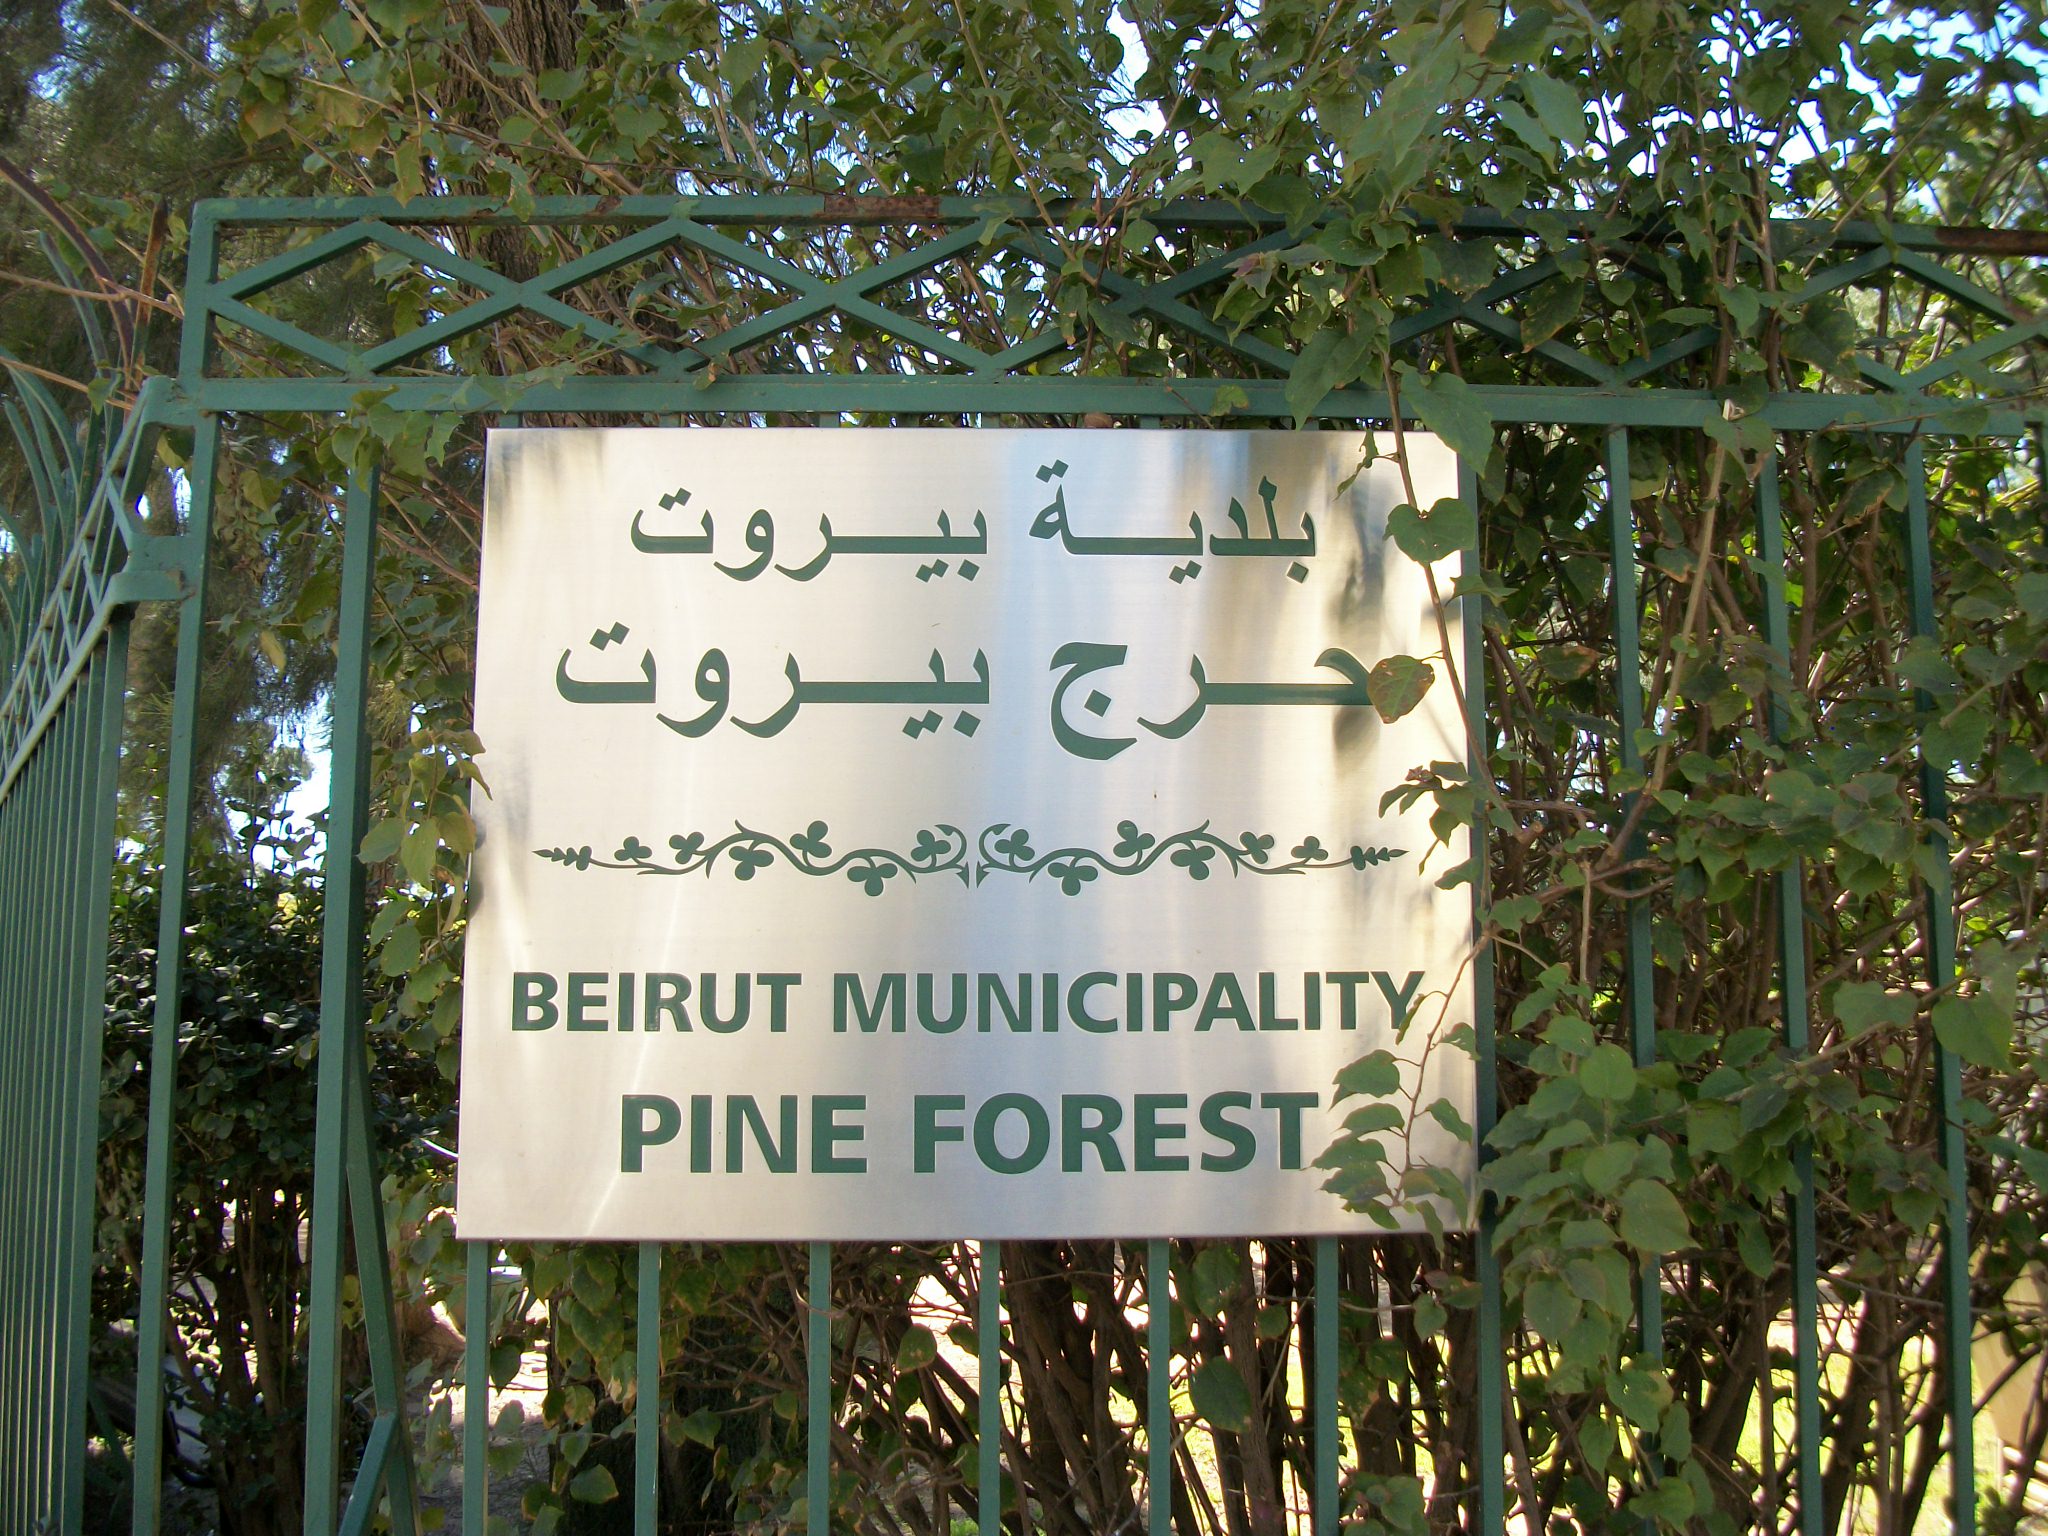 Photo showing a Beirut Municipality Horsh Beirut sign hung up on a green gate against a backdrop of trees